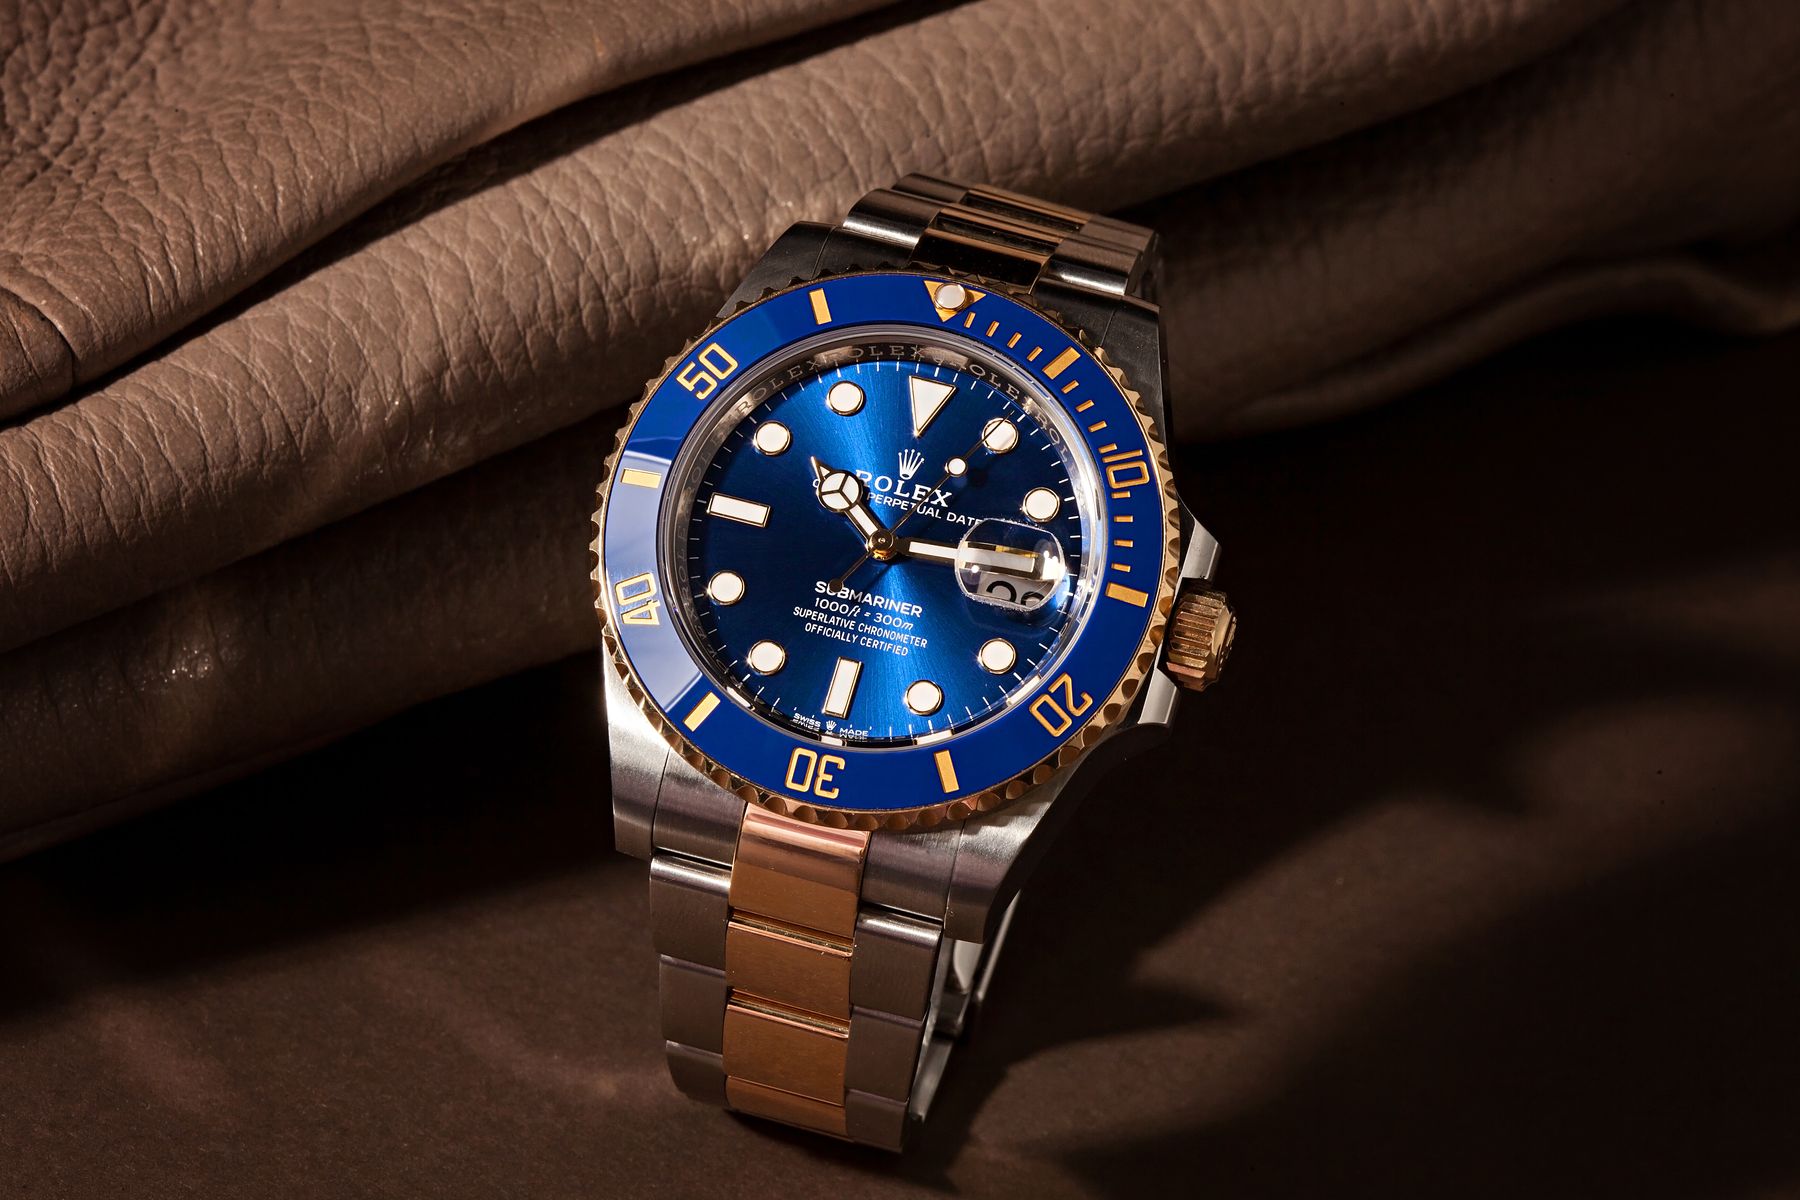 Rolex Submariner Tone and Evolution - Bob's Watches